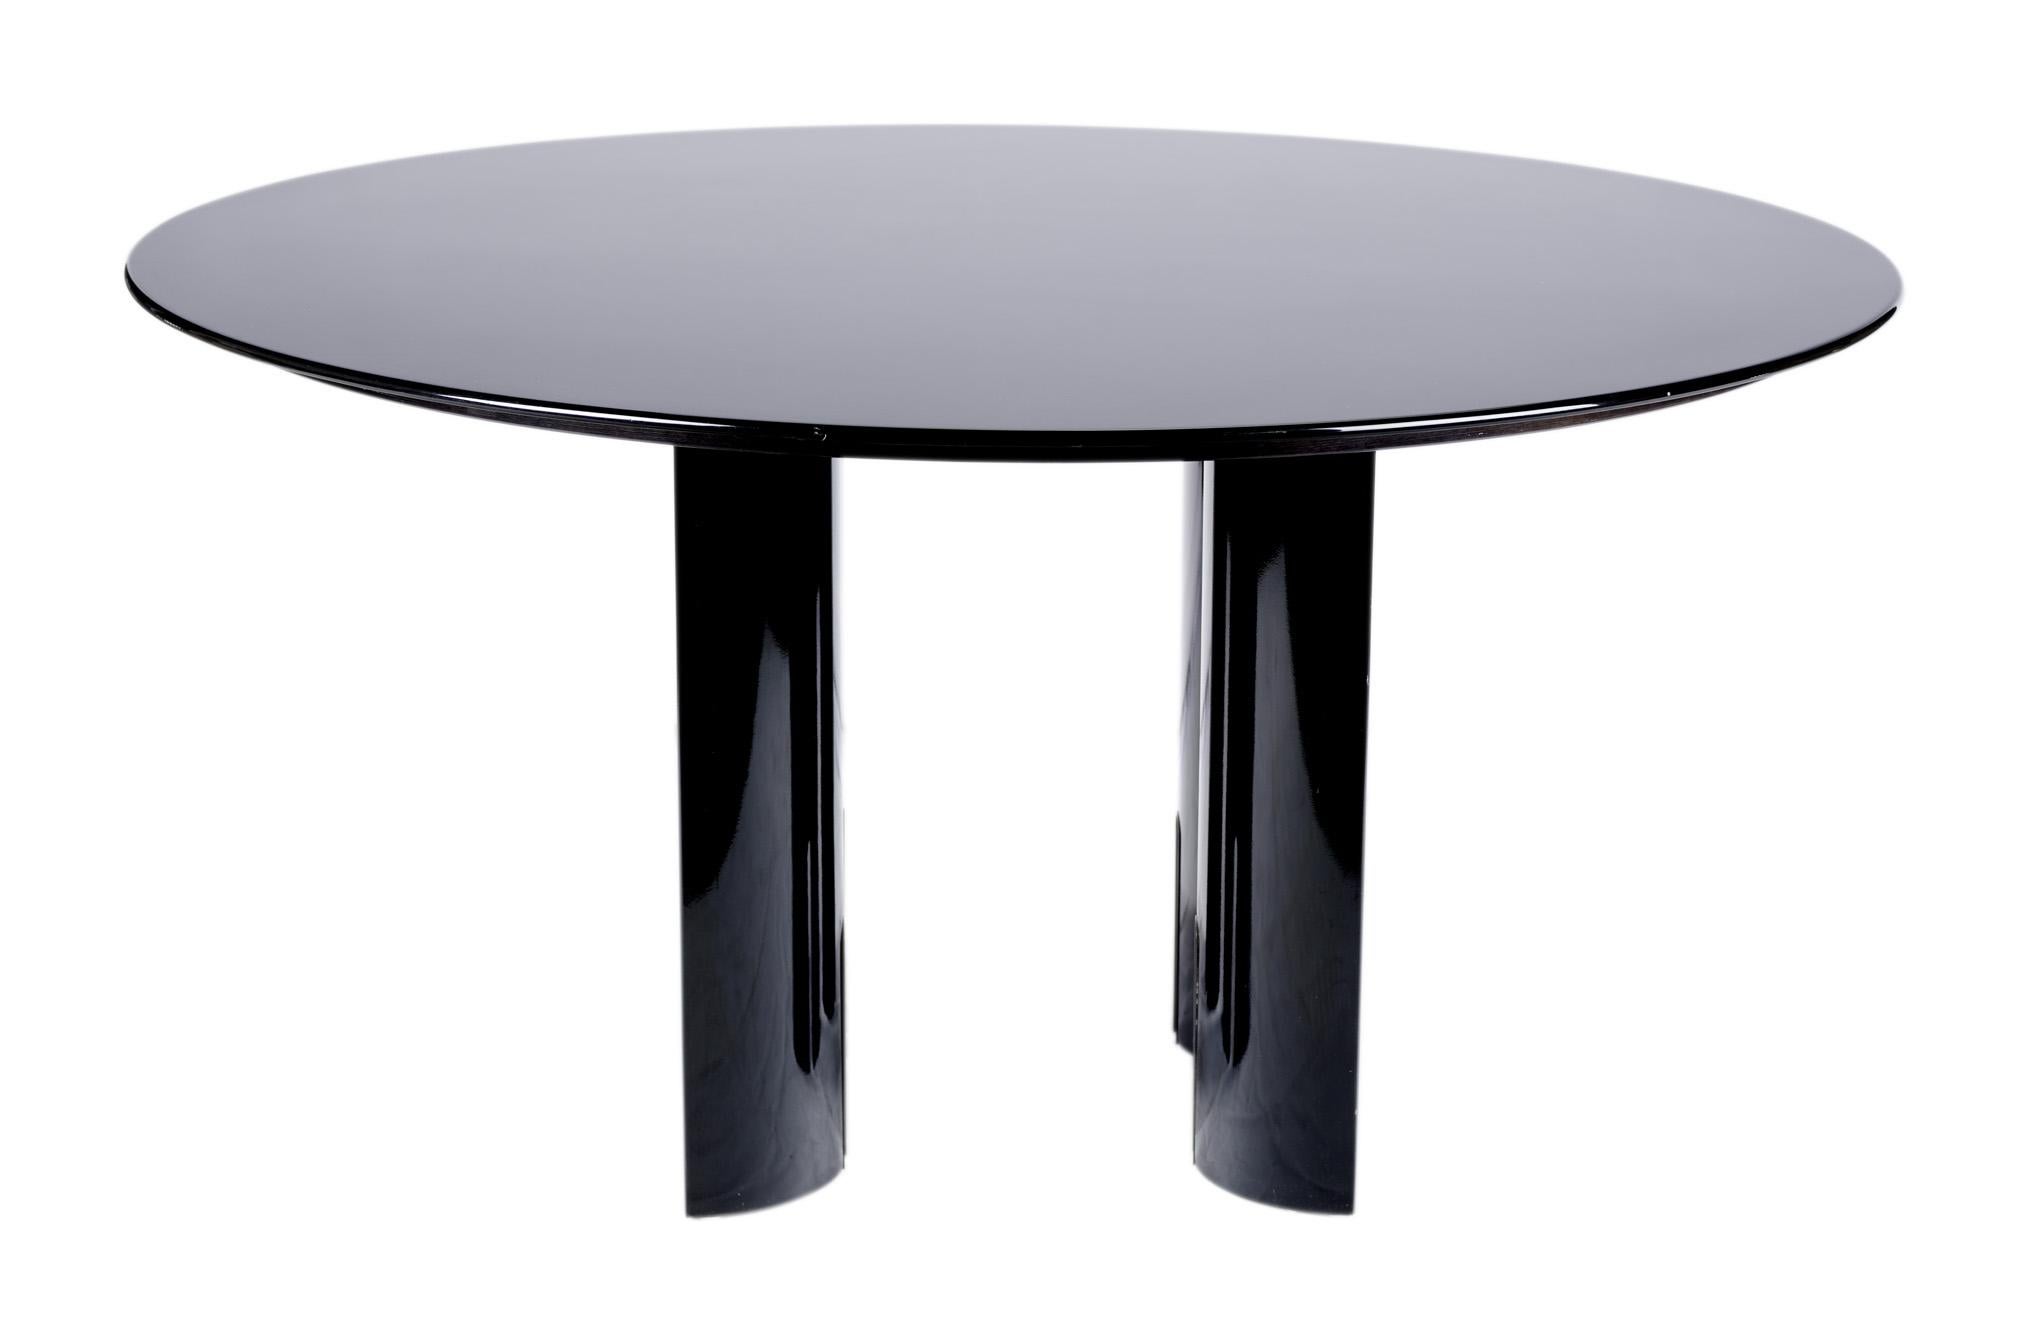 Mid-Century Modern Italian Black Lacquered Round Dining Table by Giovanni Offredi for Saporiti 1980